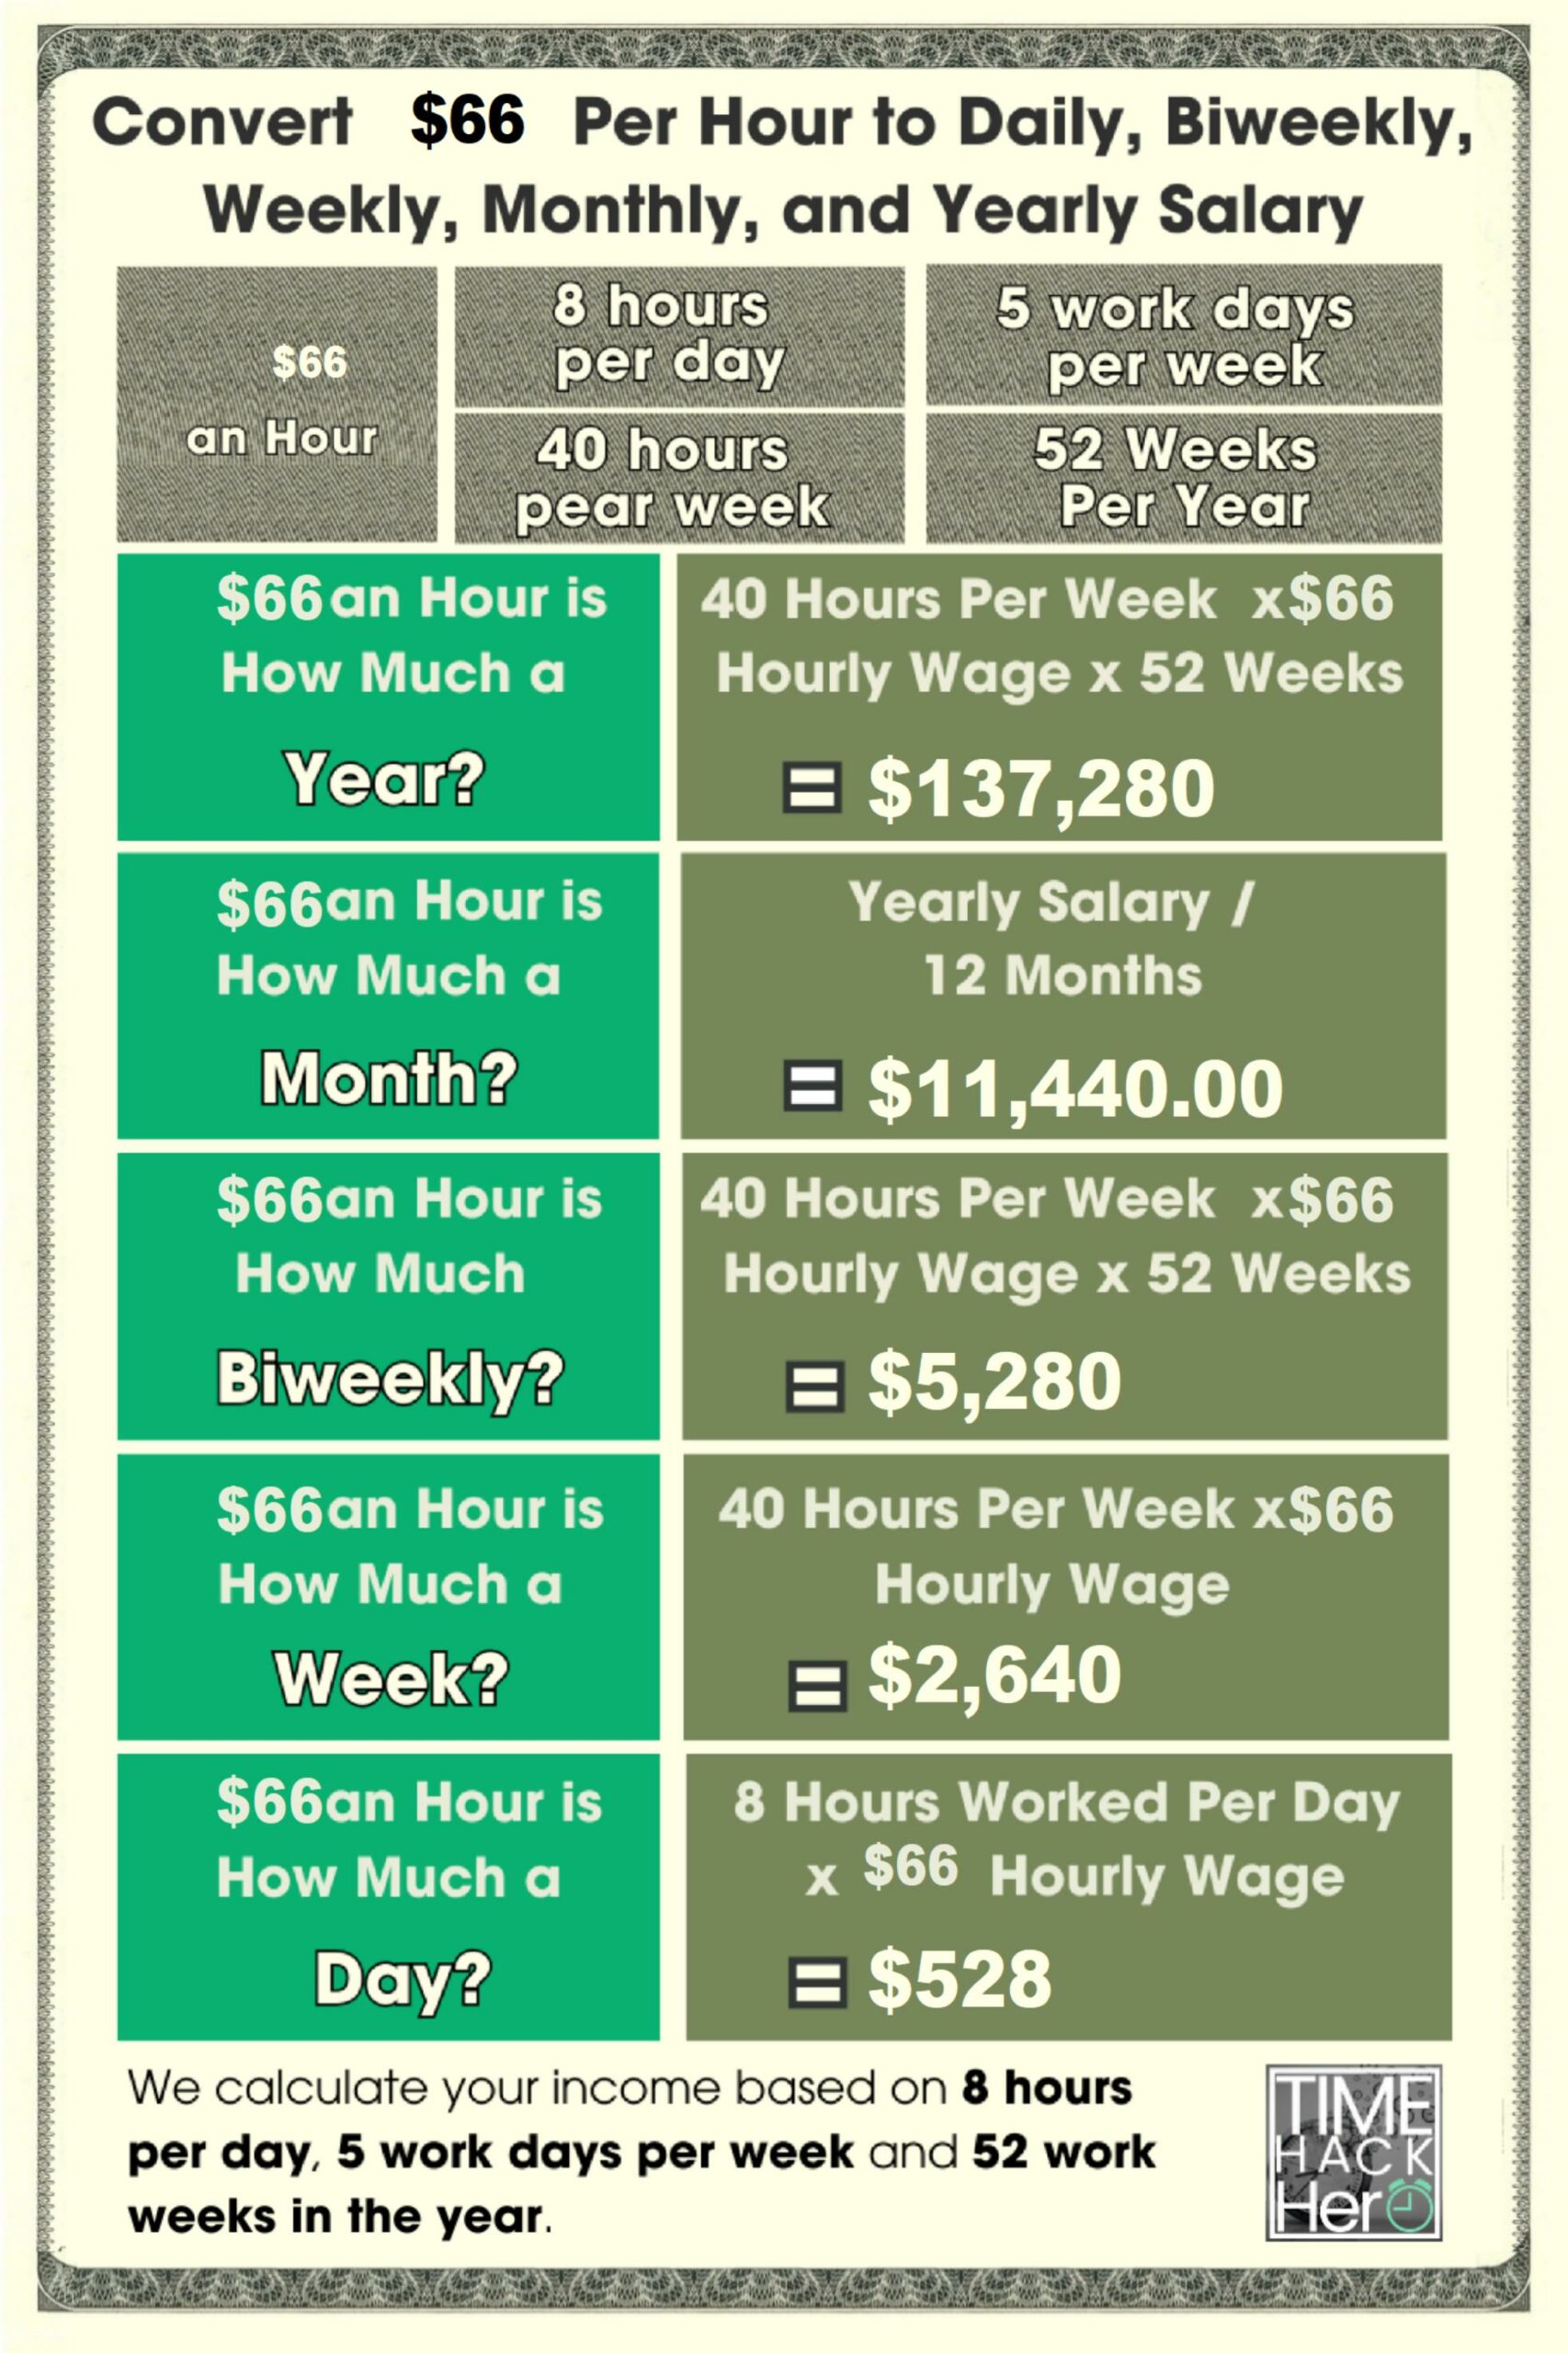 Convert $66 Per Hour to Weekly, Monthly, and Yearly Salary